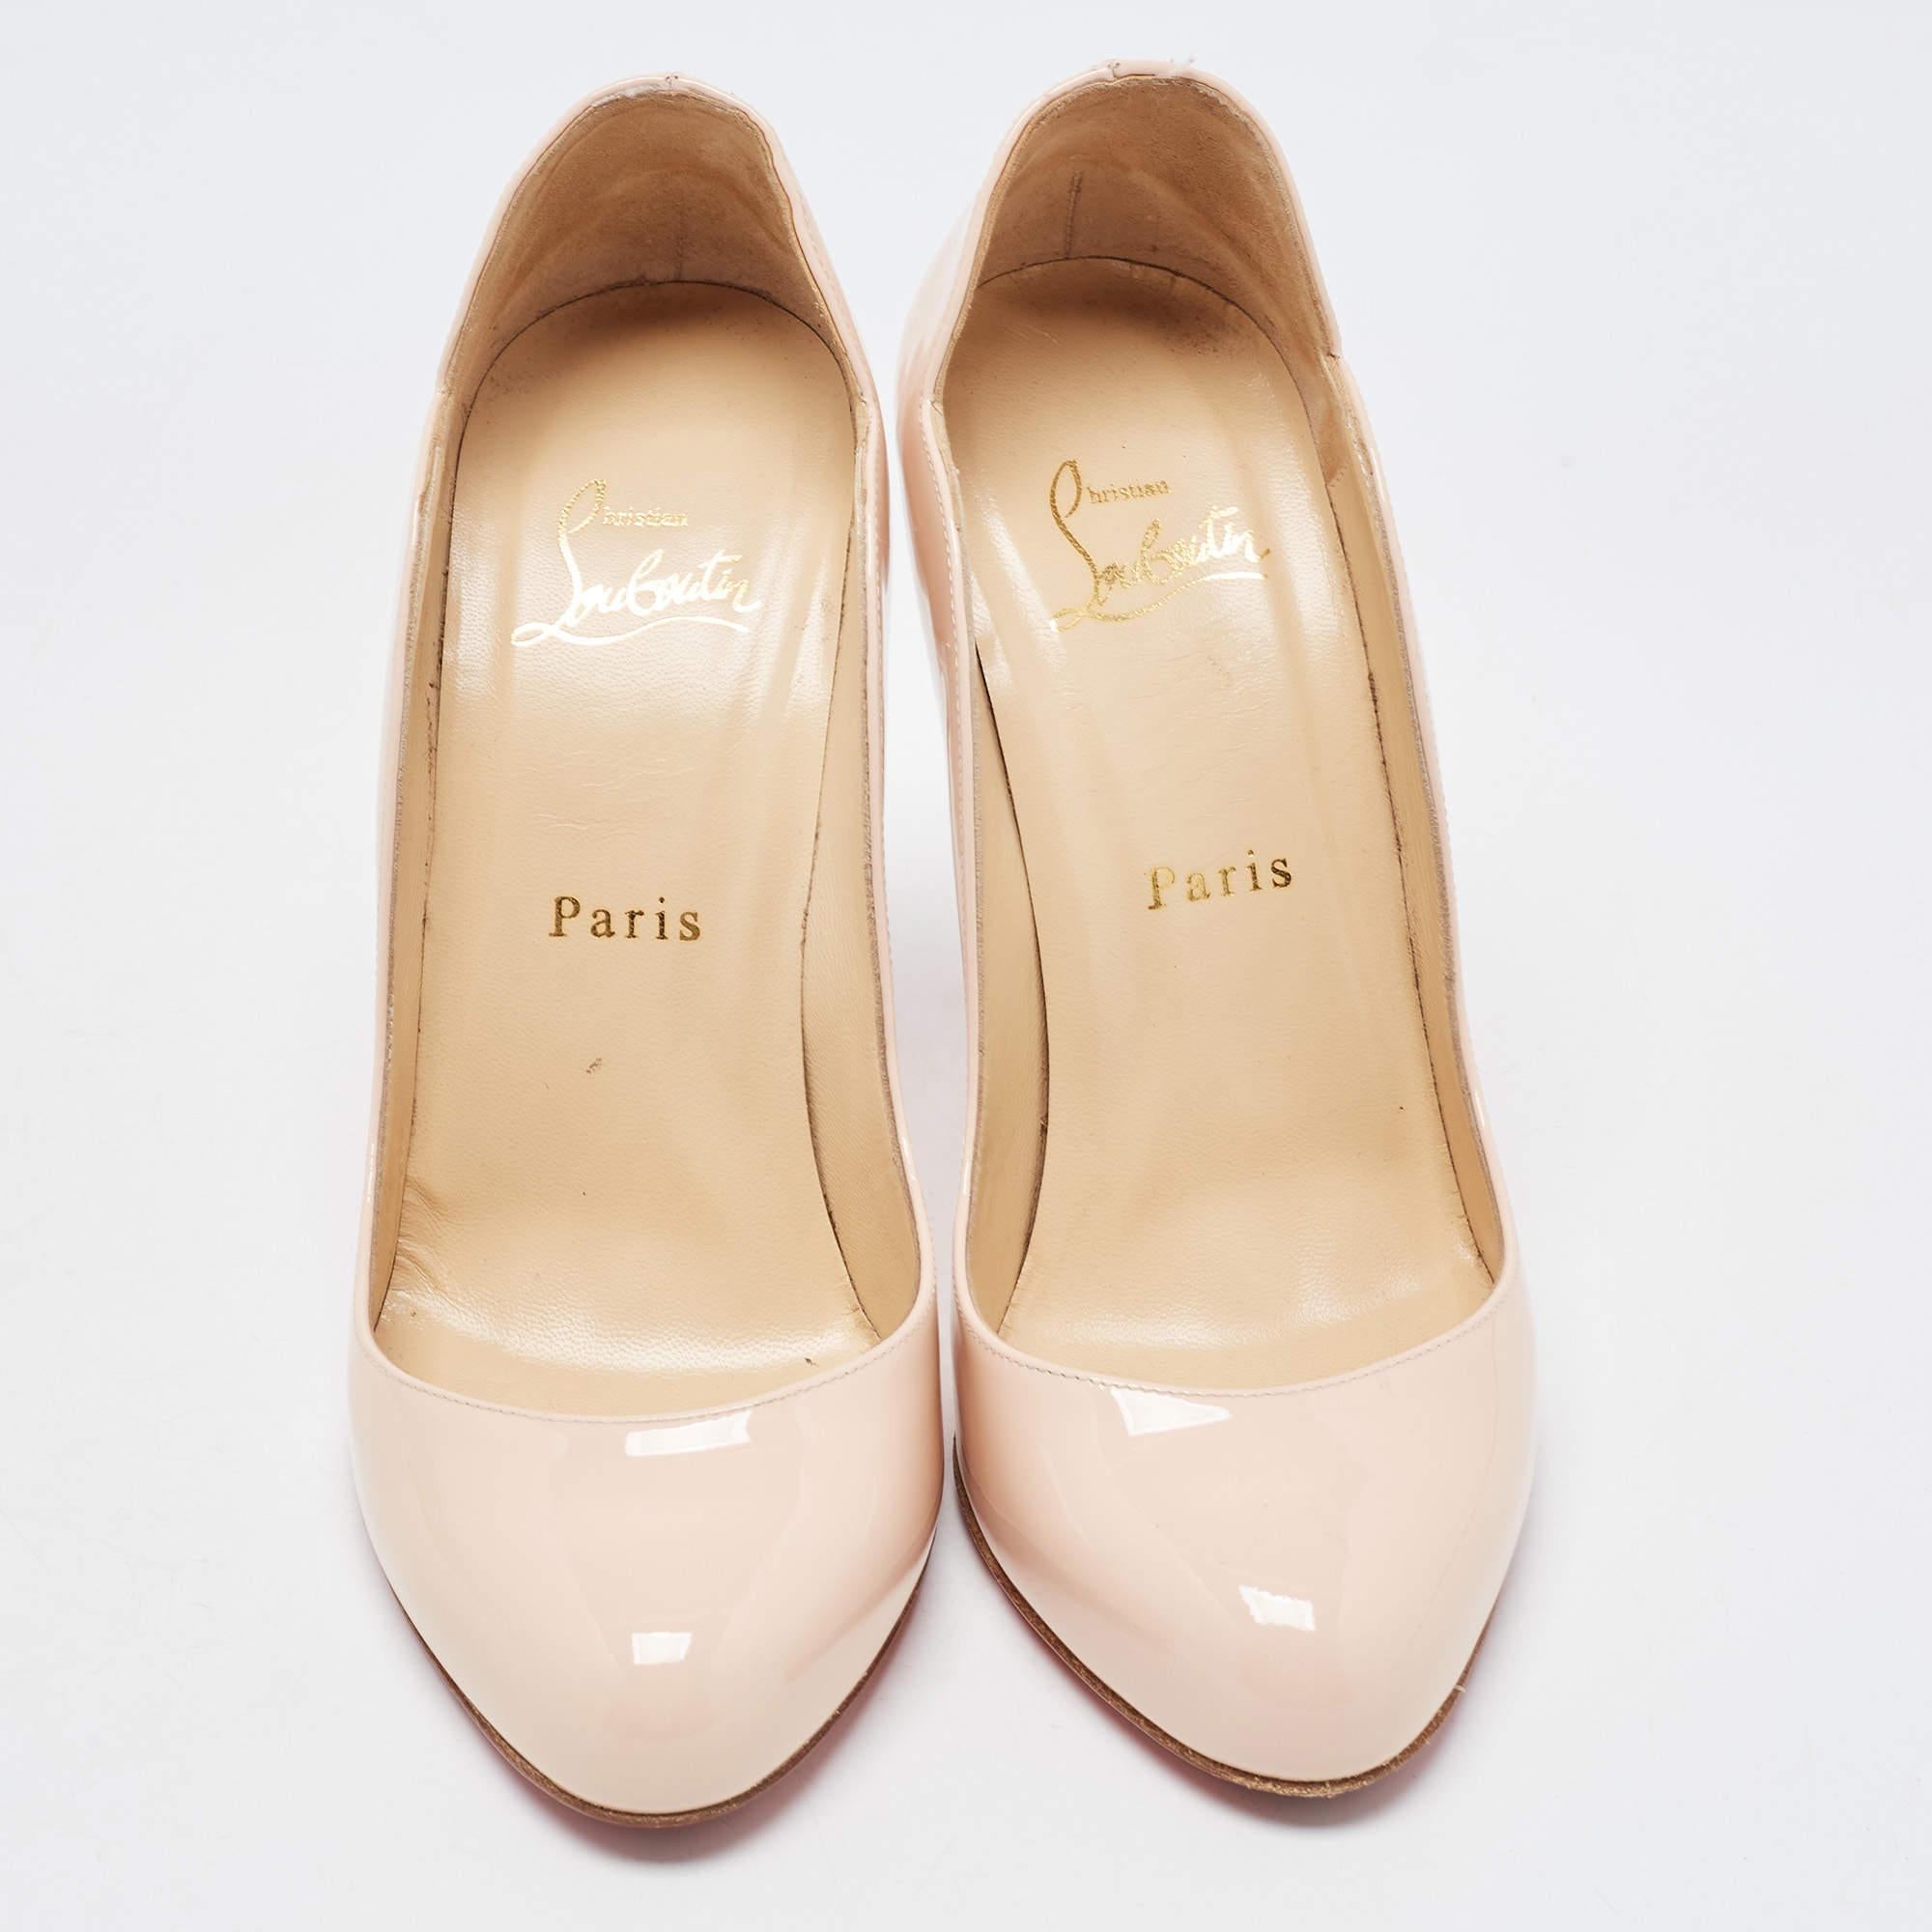 Beige Christian Louboutin Light Pink Patent Leather Wawy Dolly Pumps Size 37.5